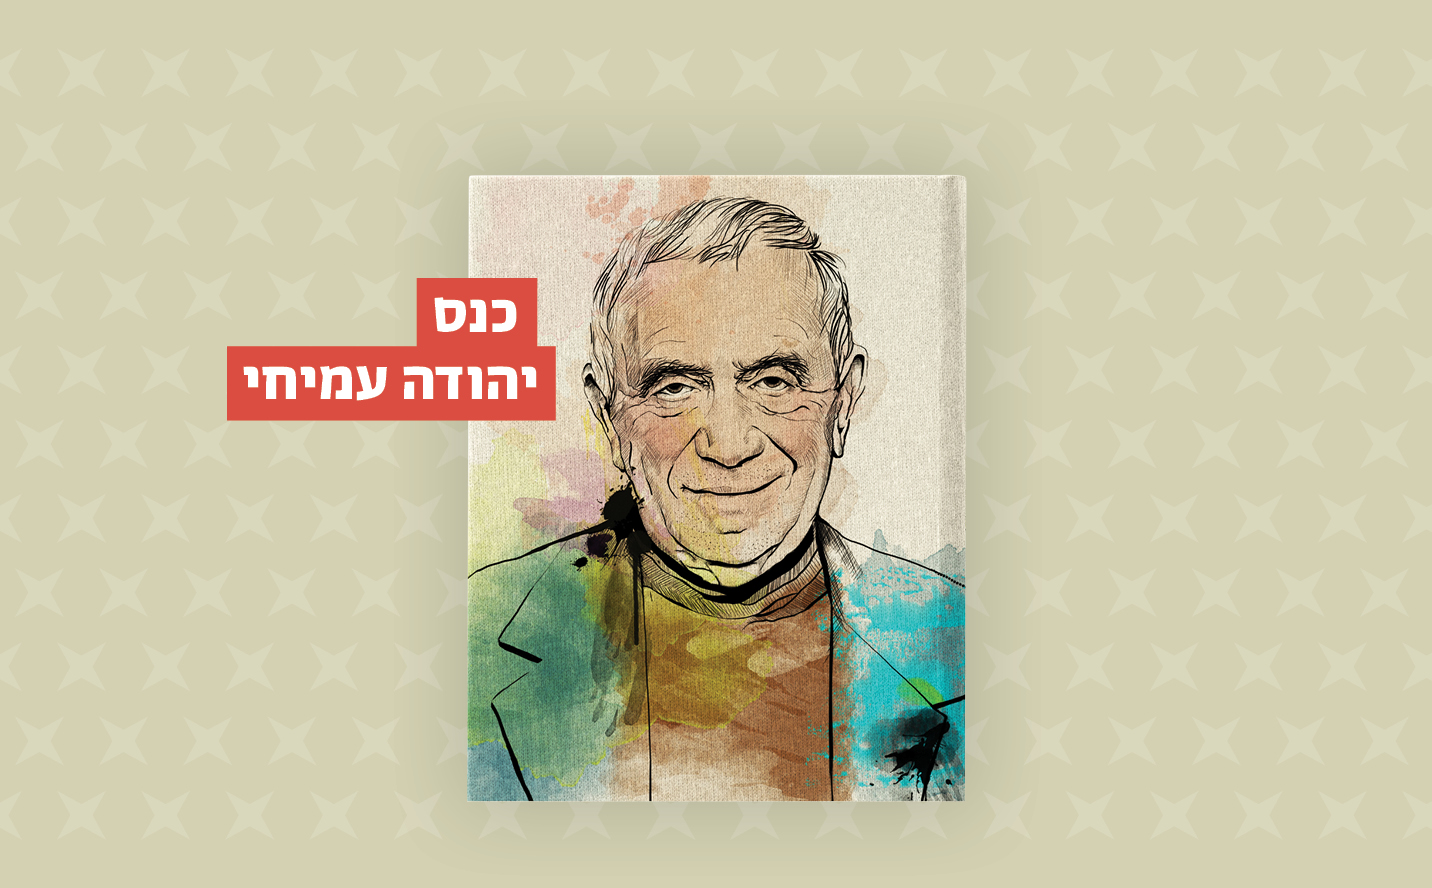 The Yehuda Amichai conference - Tuesday